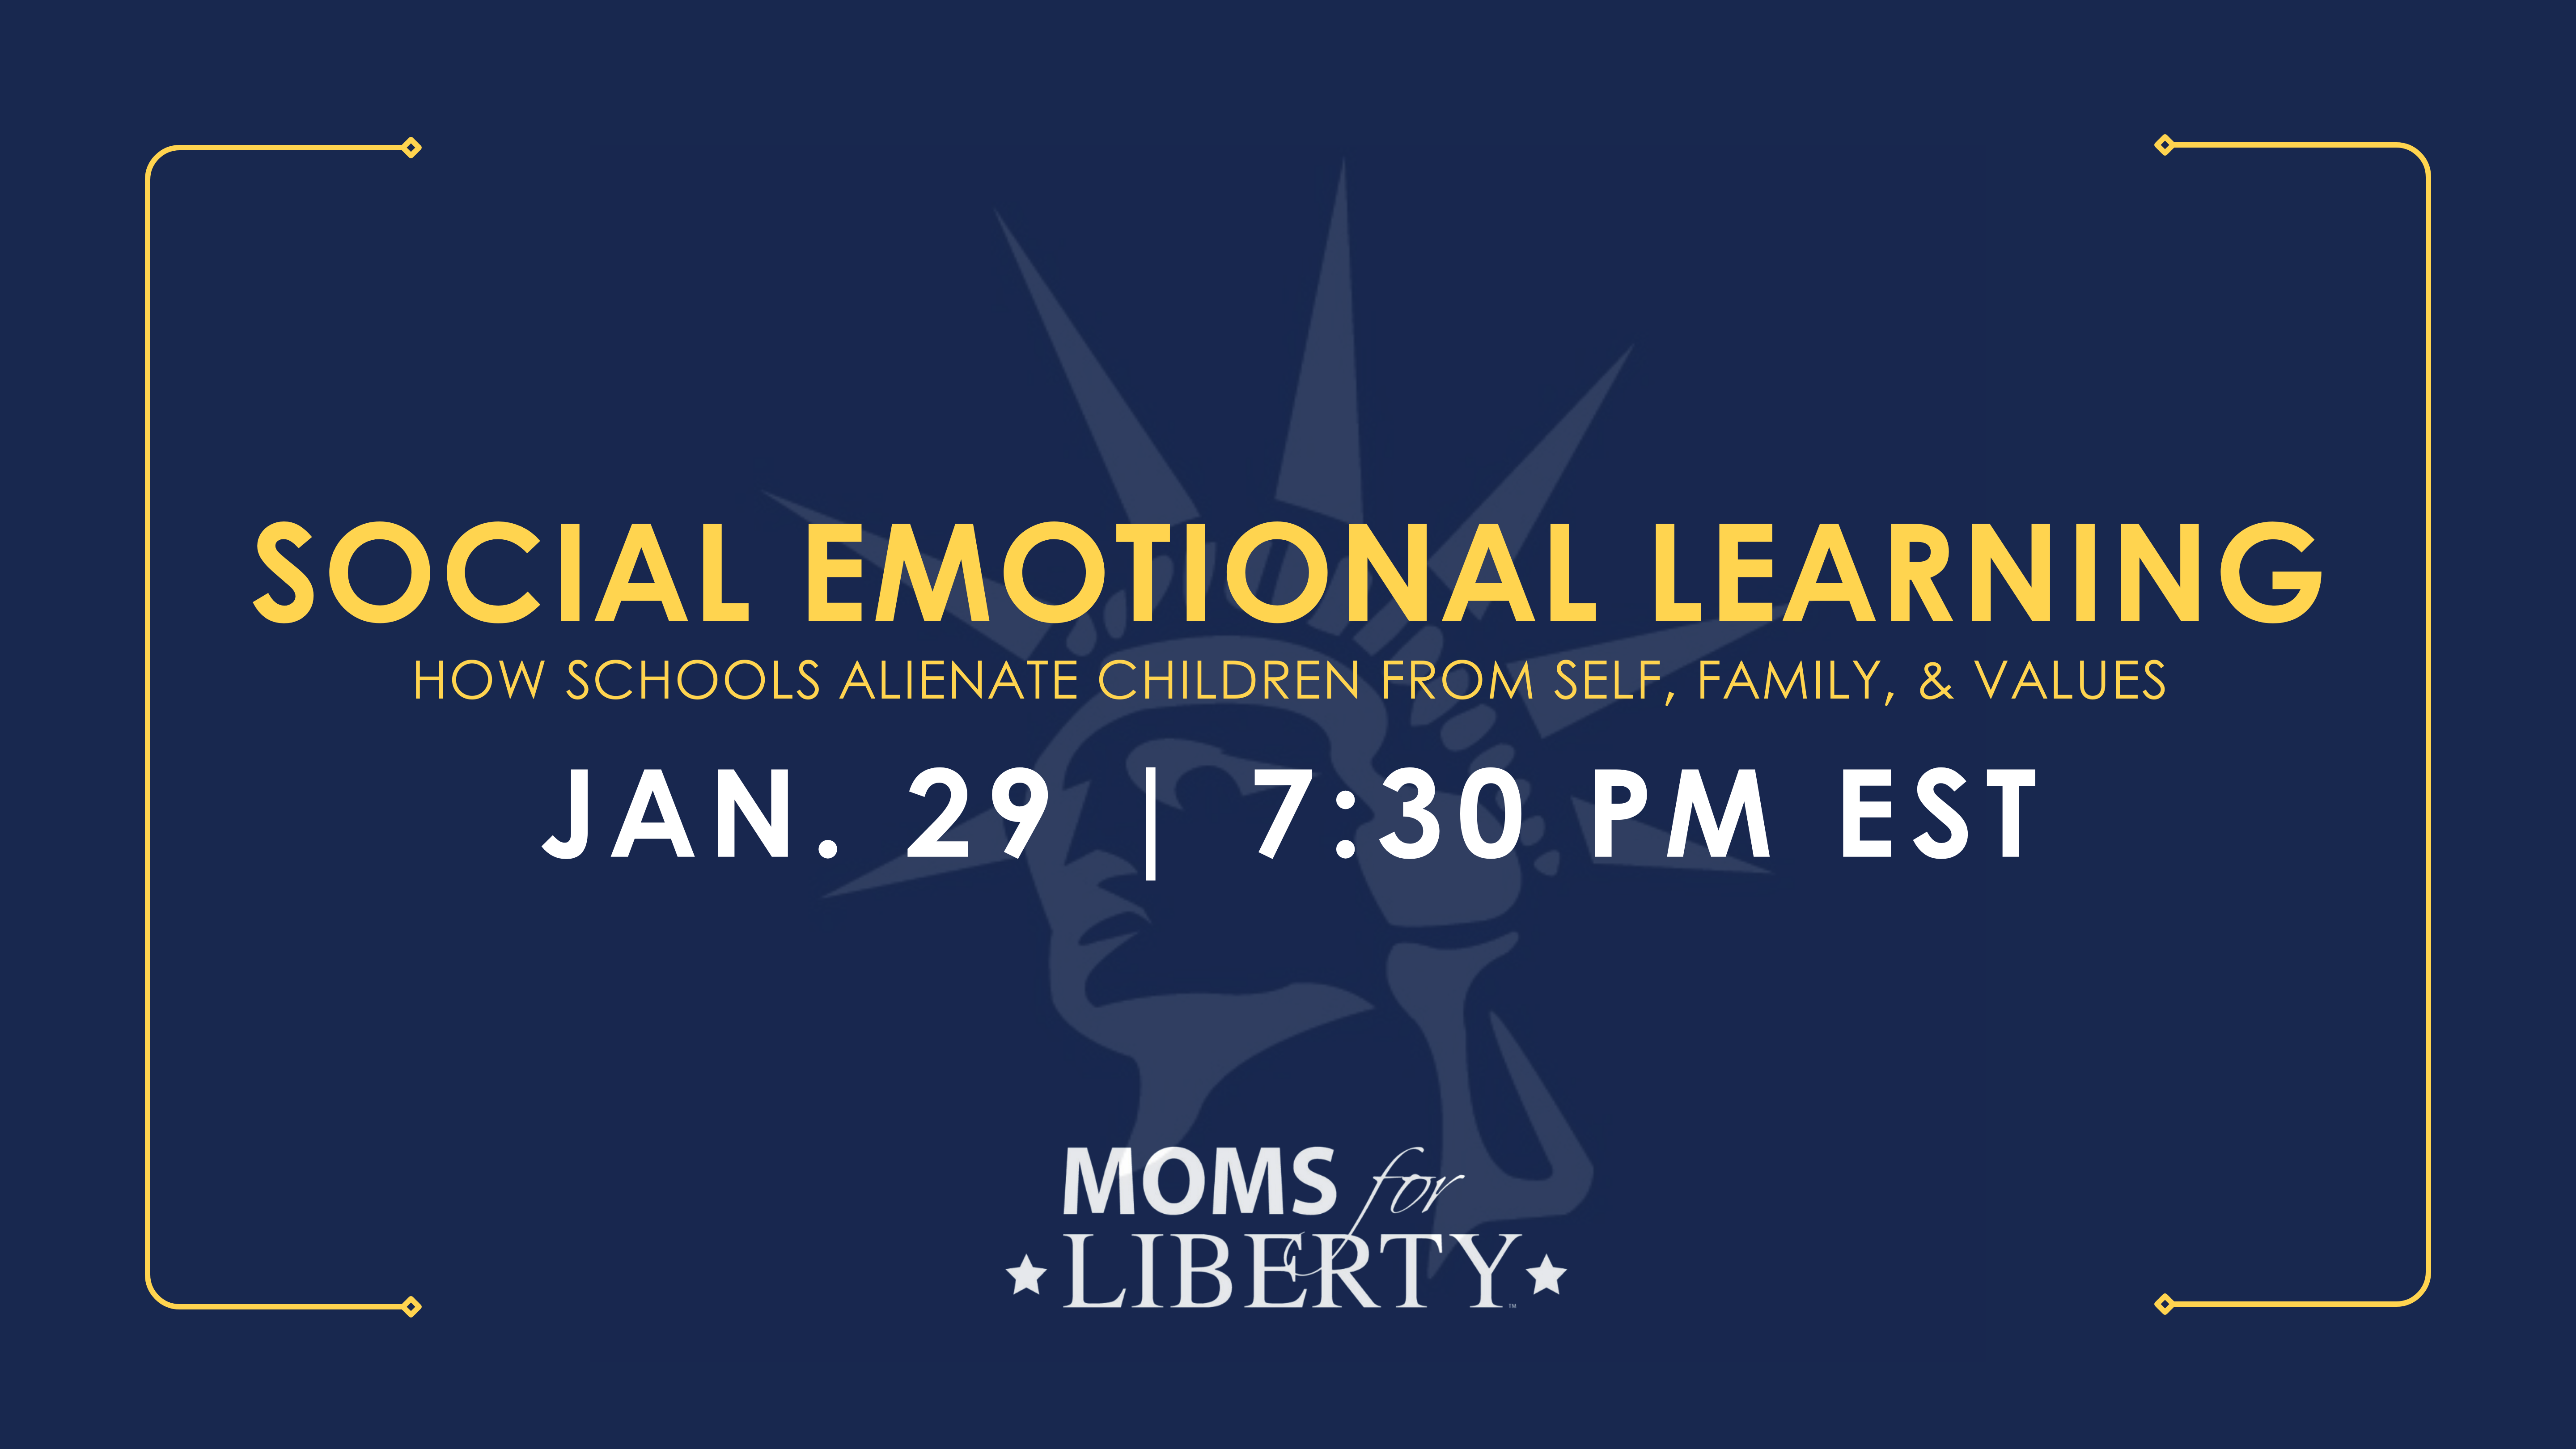 Social Emotional Learning (SEL): How Schools Alienate Children from Self, Family, & Values